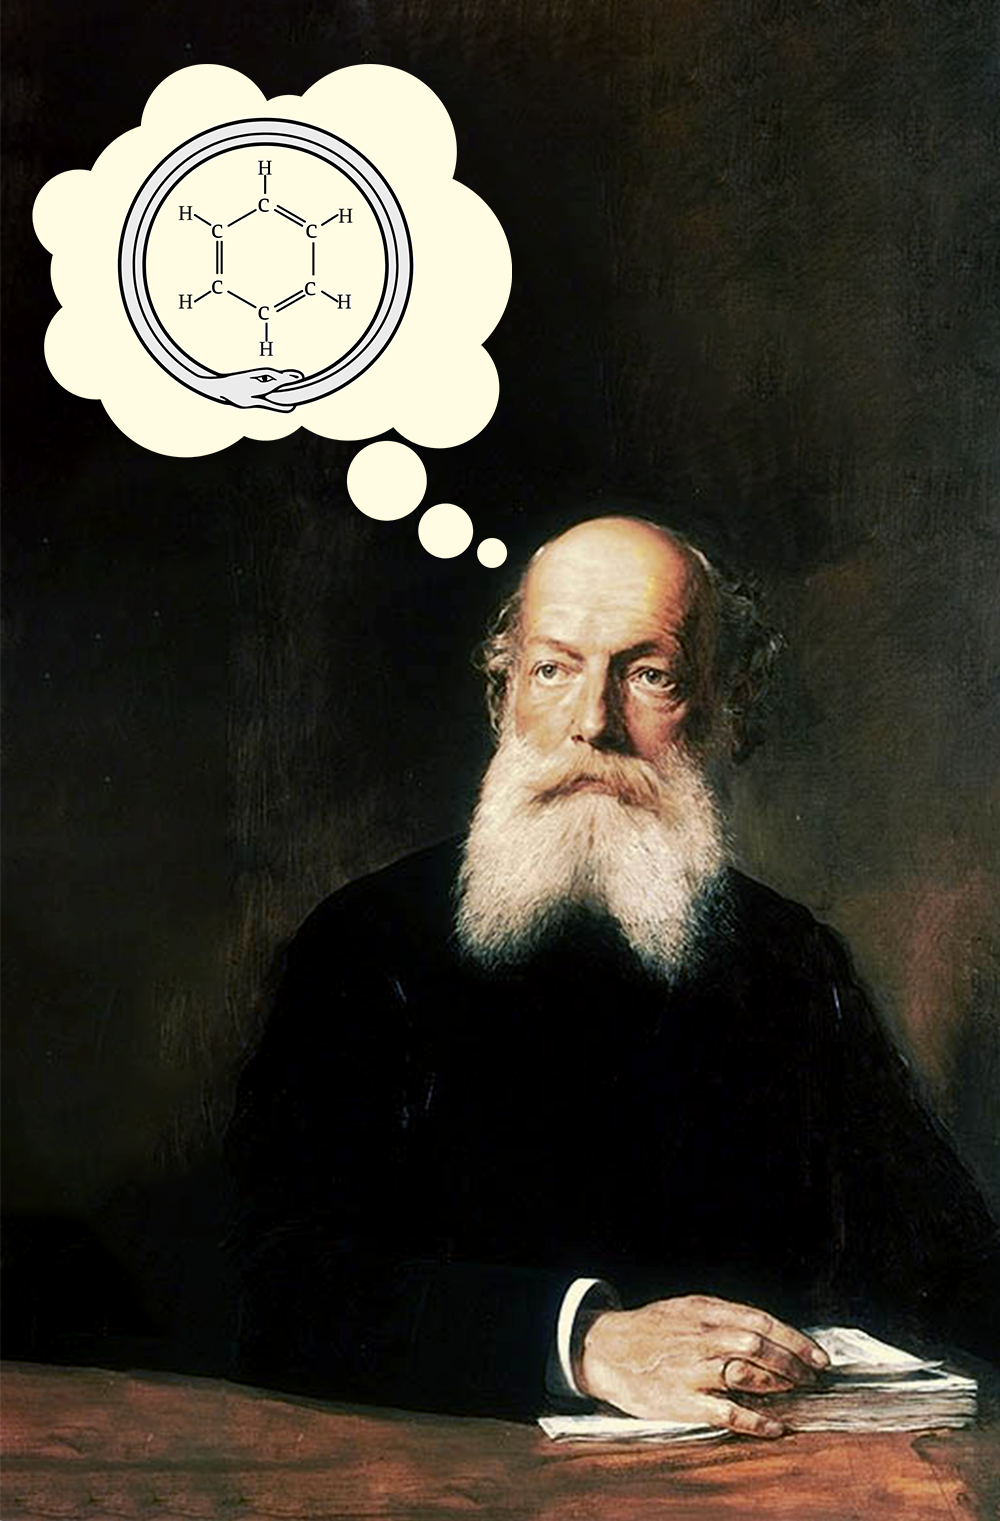 A portrait of Friedrich August Kekule, he has a thought bubble above his head. The thought bubble features a snake eating its own tail and a benzene ring molecule in side the snake circle.